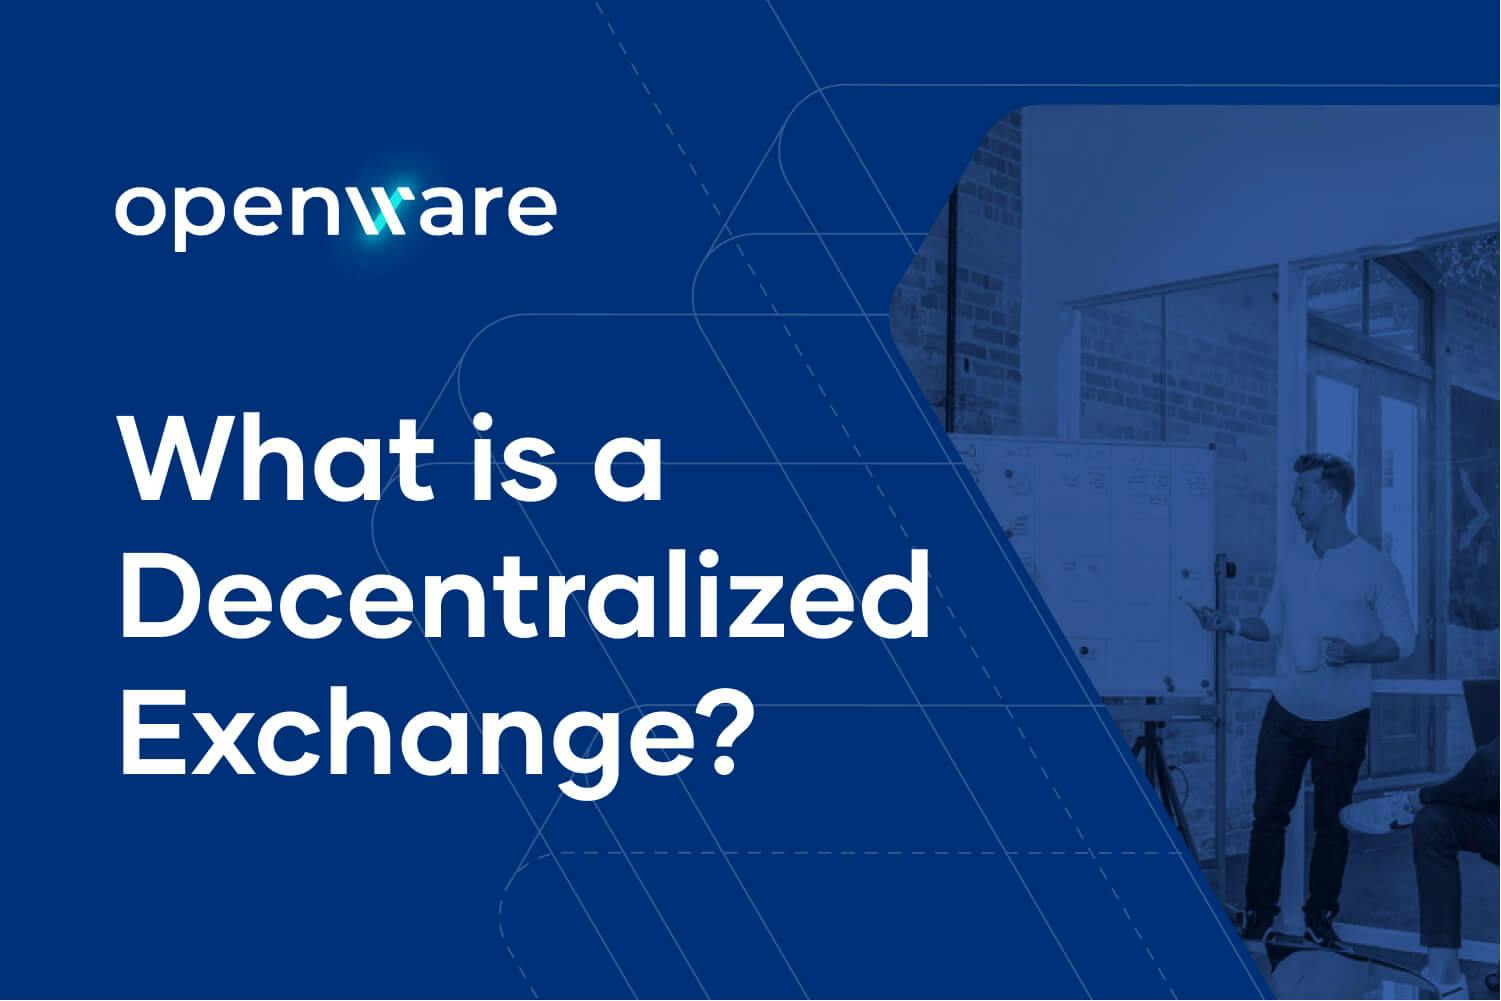 Blue stylized background with the words "What is a Decentralized Exchange?" written in white